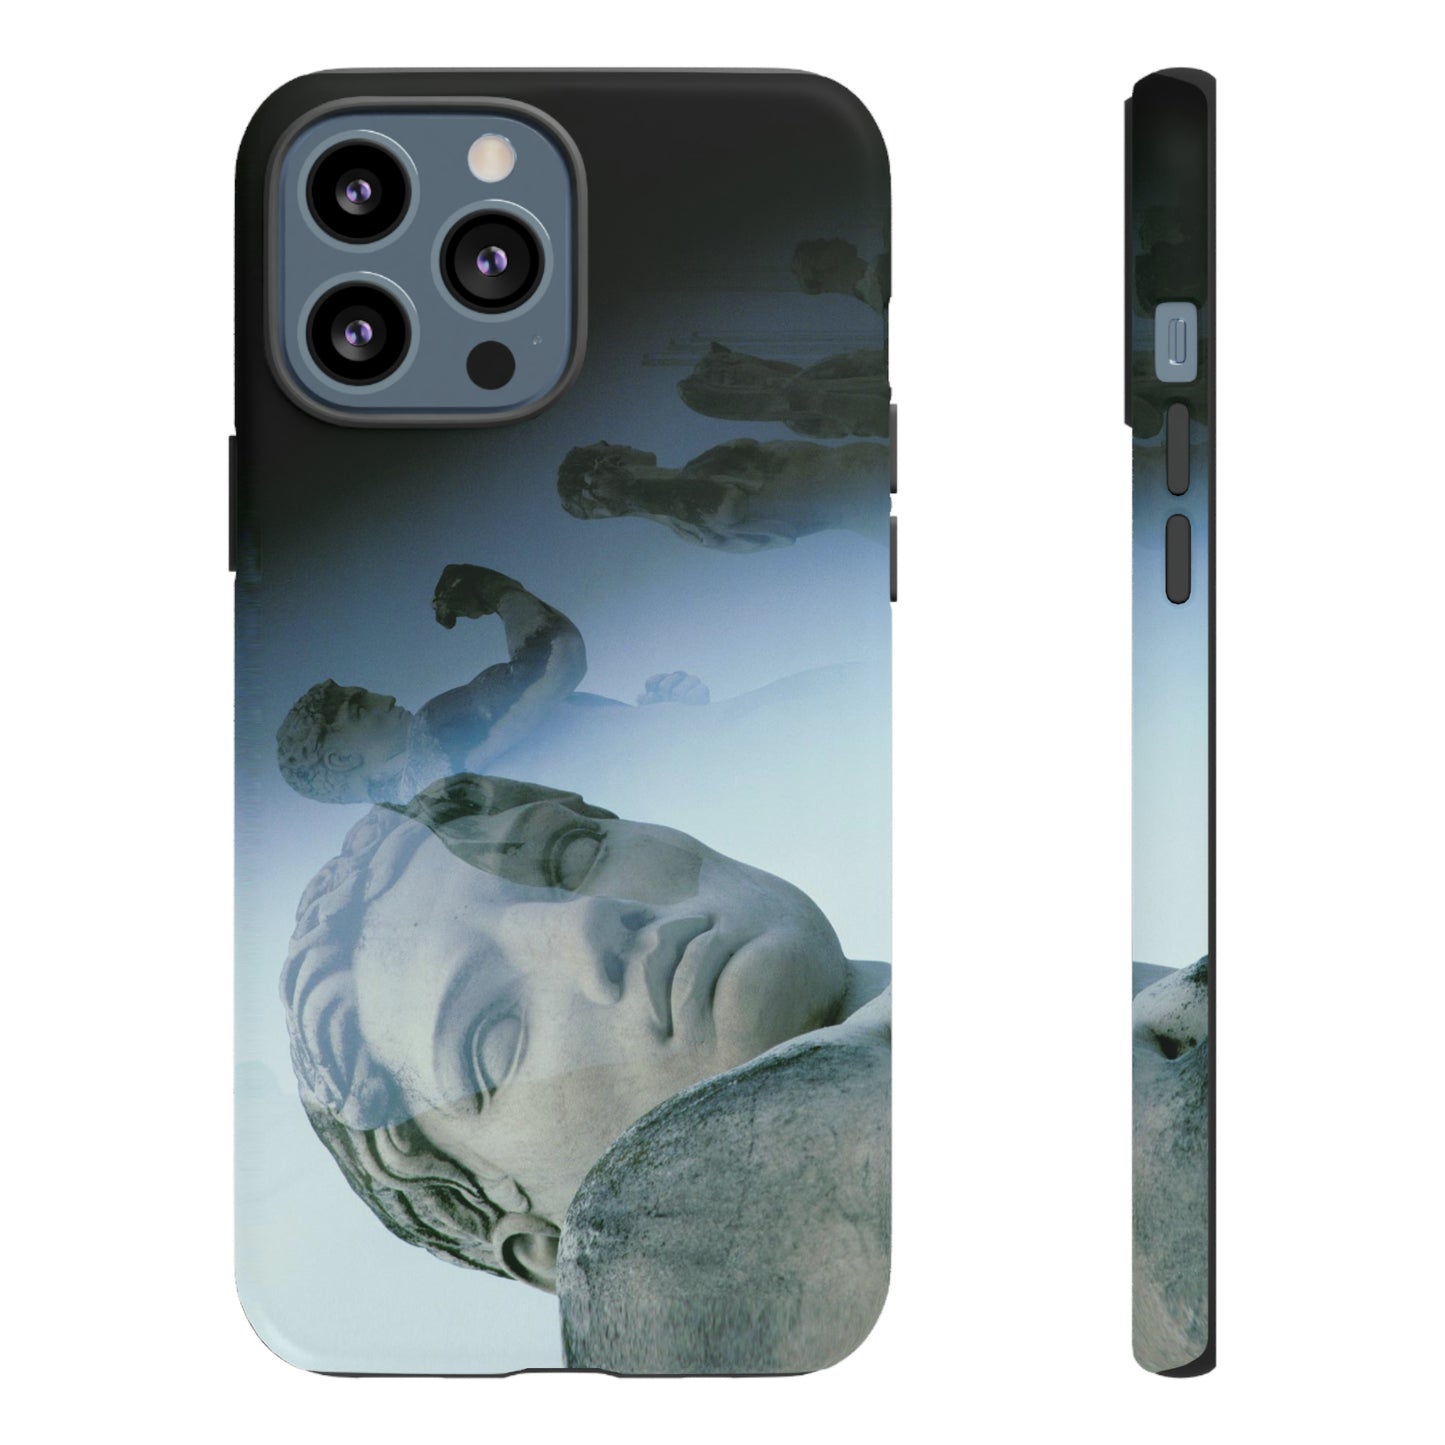 Stadius of the Marbles Phone Cases